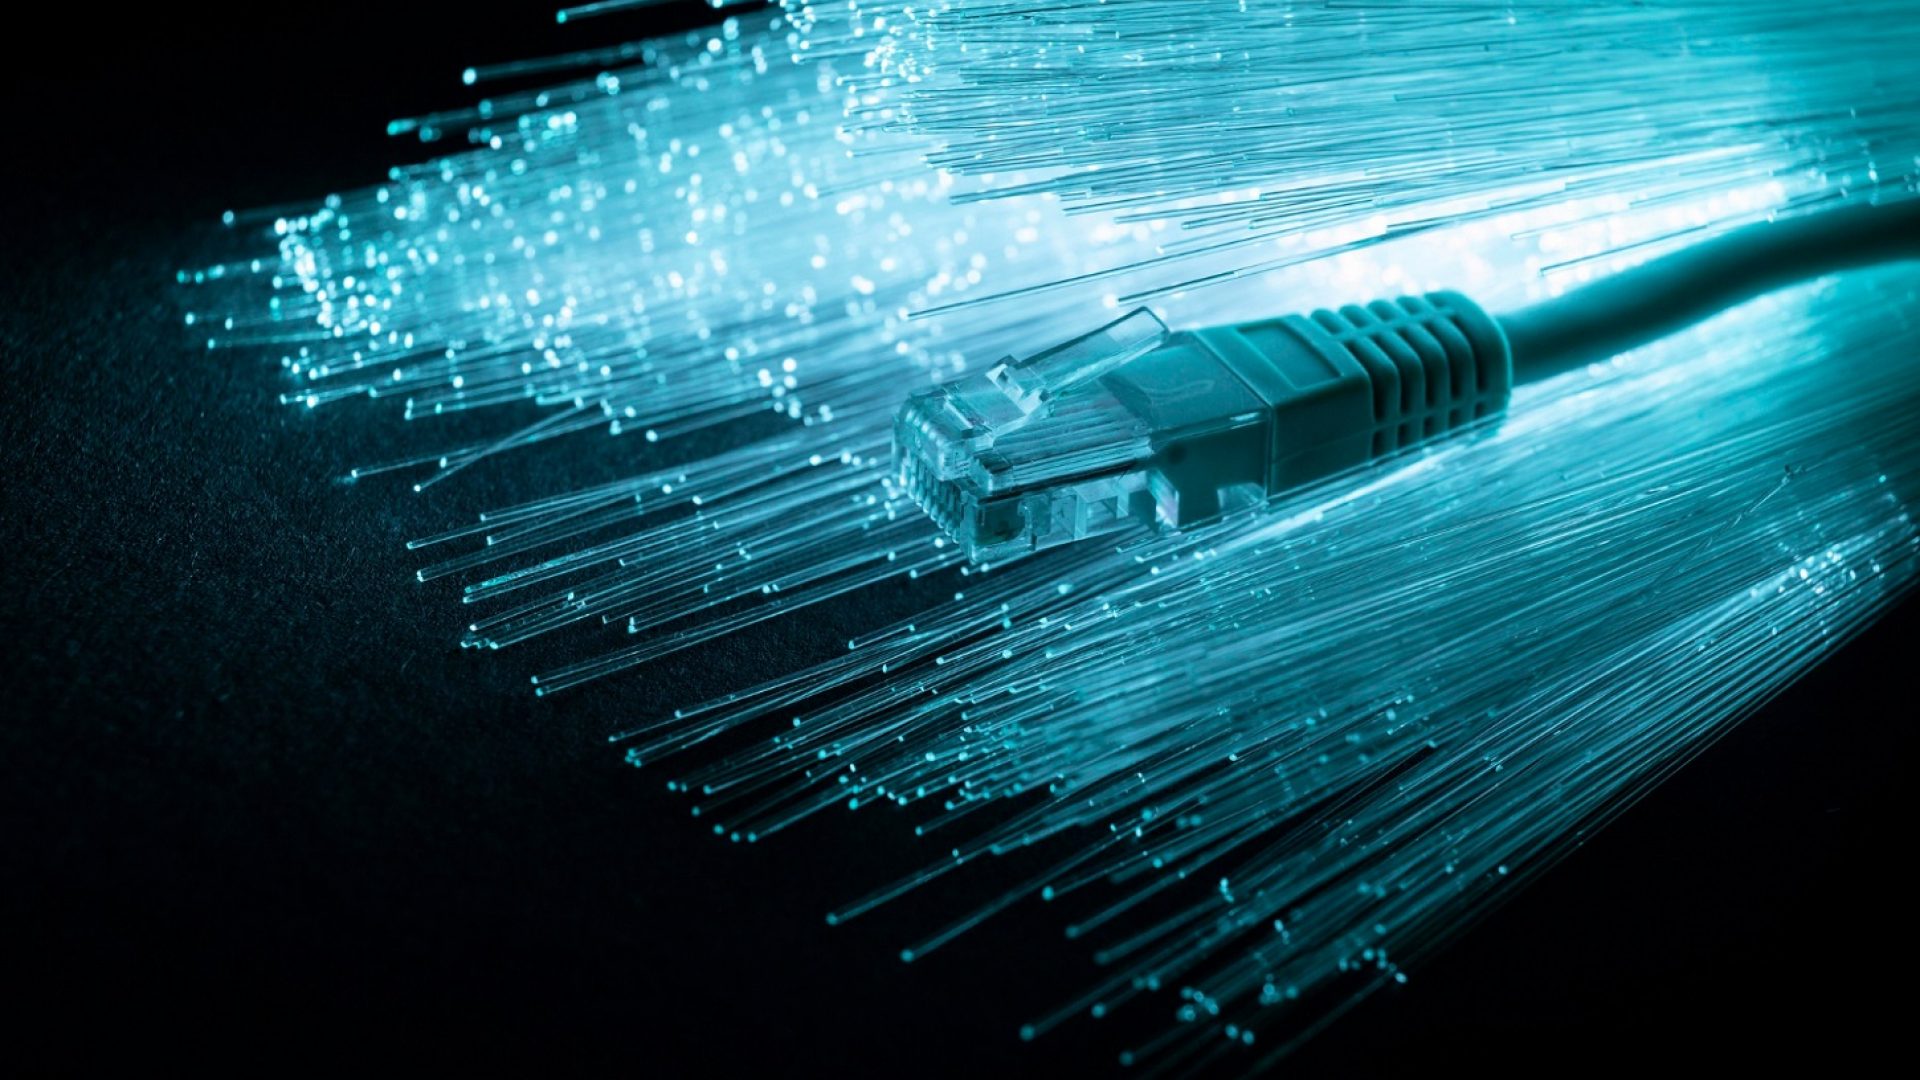 Blue fiber optic cables with an ethernet cable